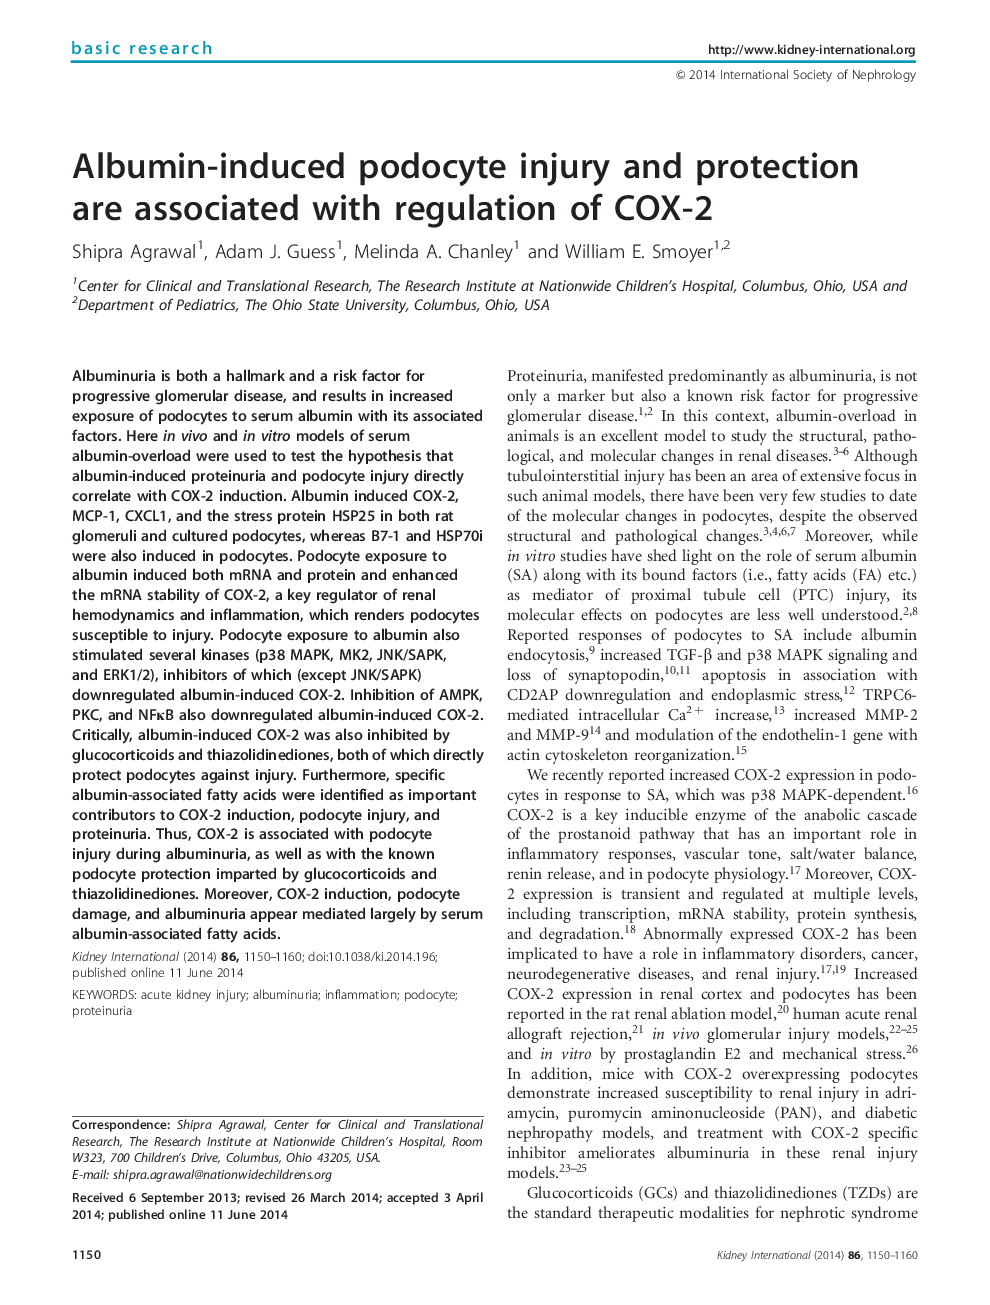 Albumin-induced podocyte injury and protection are associated with regulation of COX-2